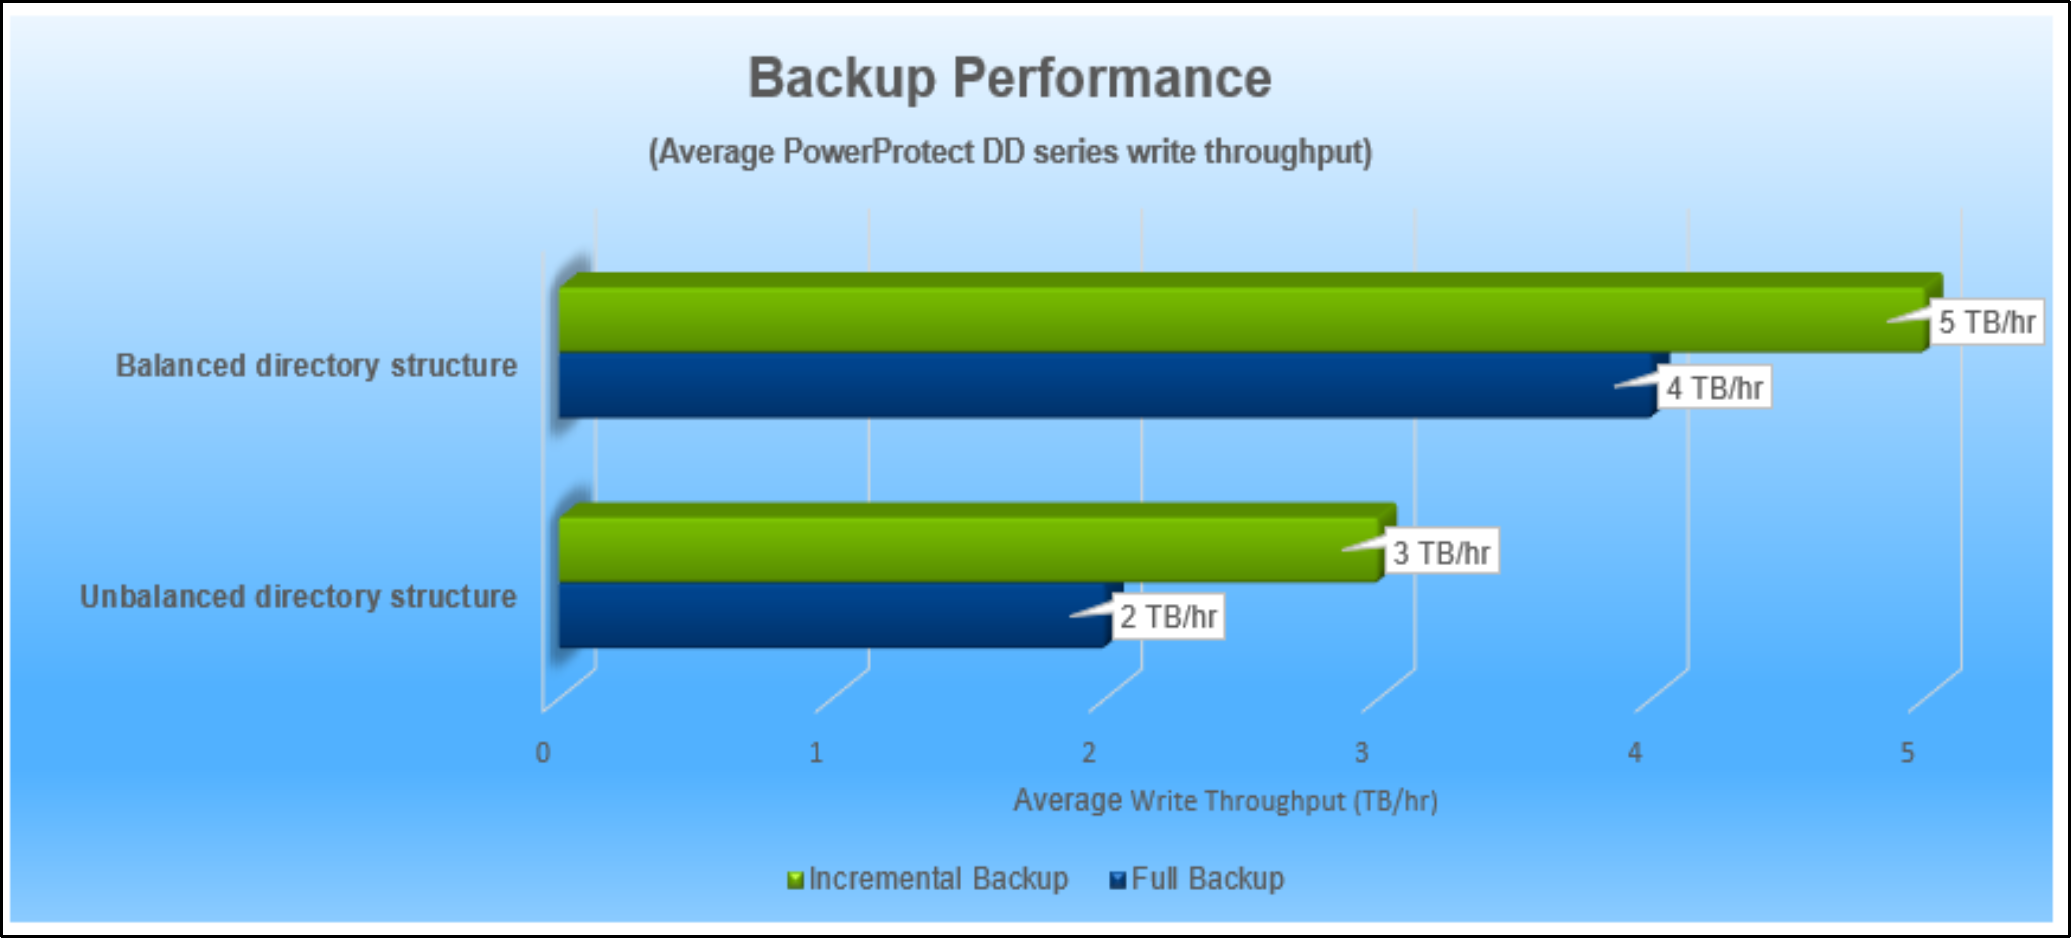 Backup performance graph showing comparison of average throughput for Balanced directory structure vs unbalanced directory structure for High density NAS shares.